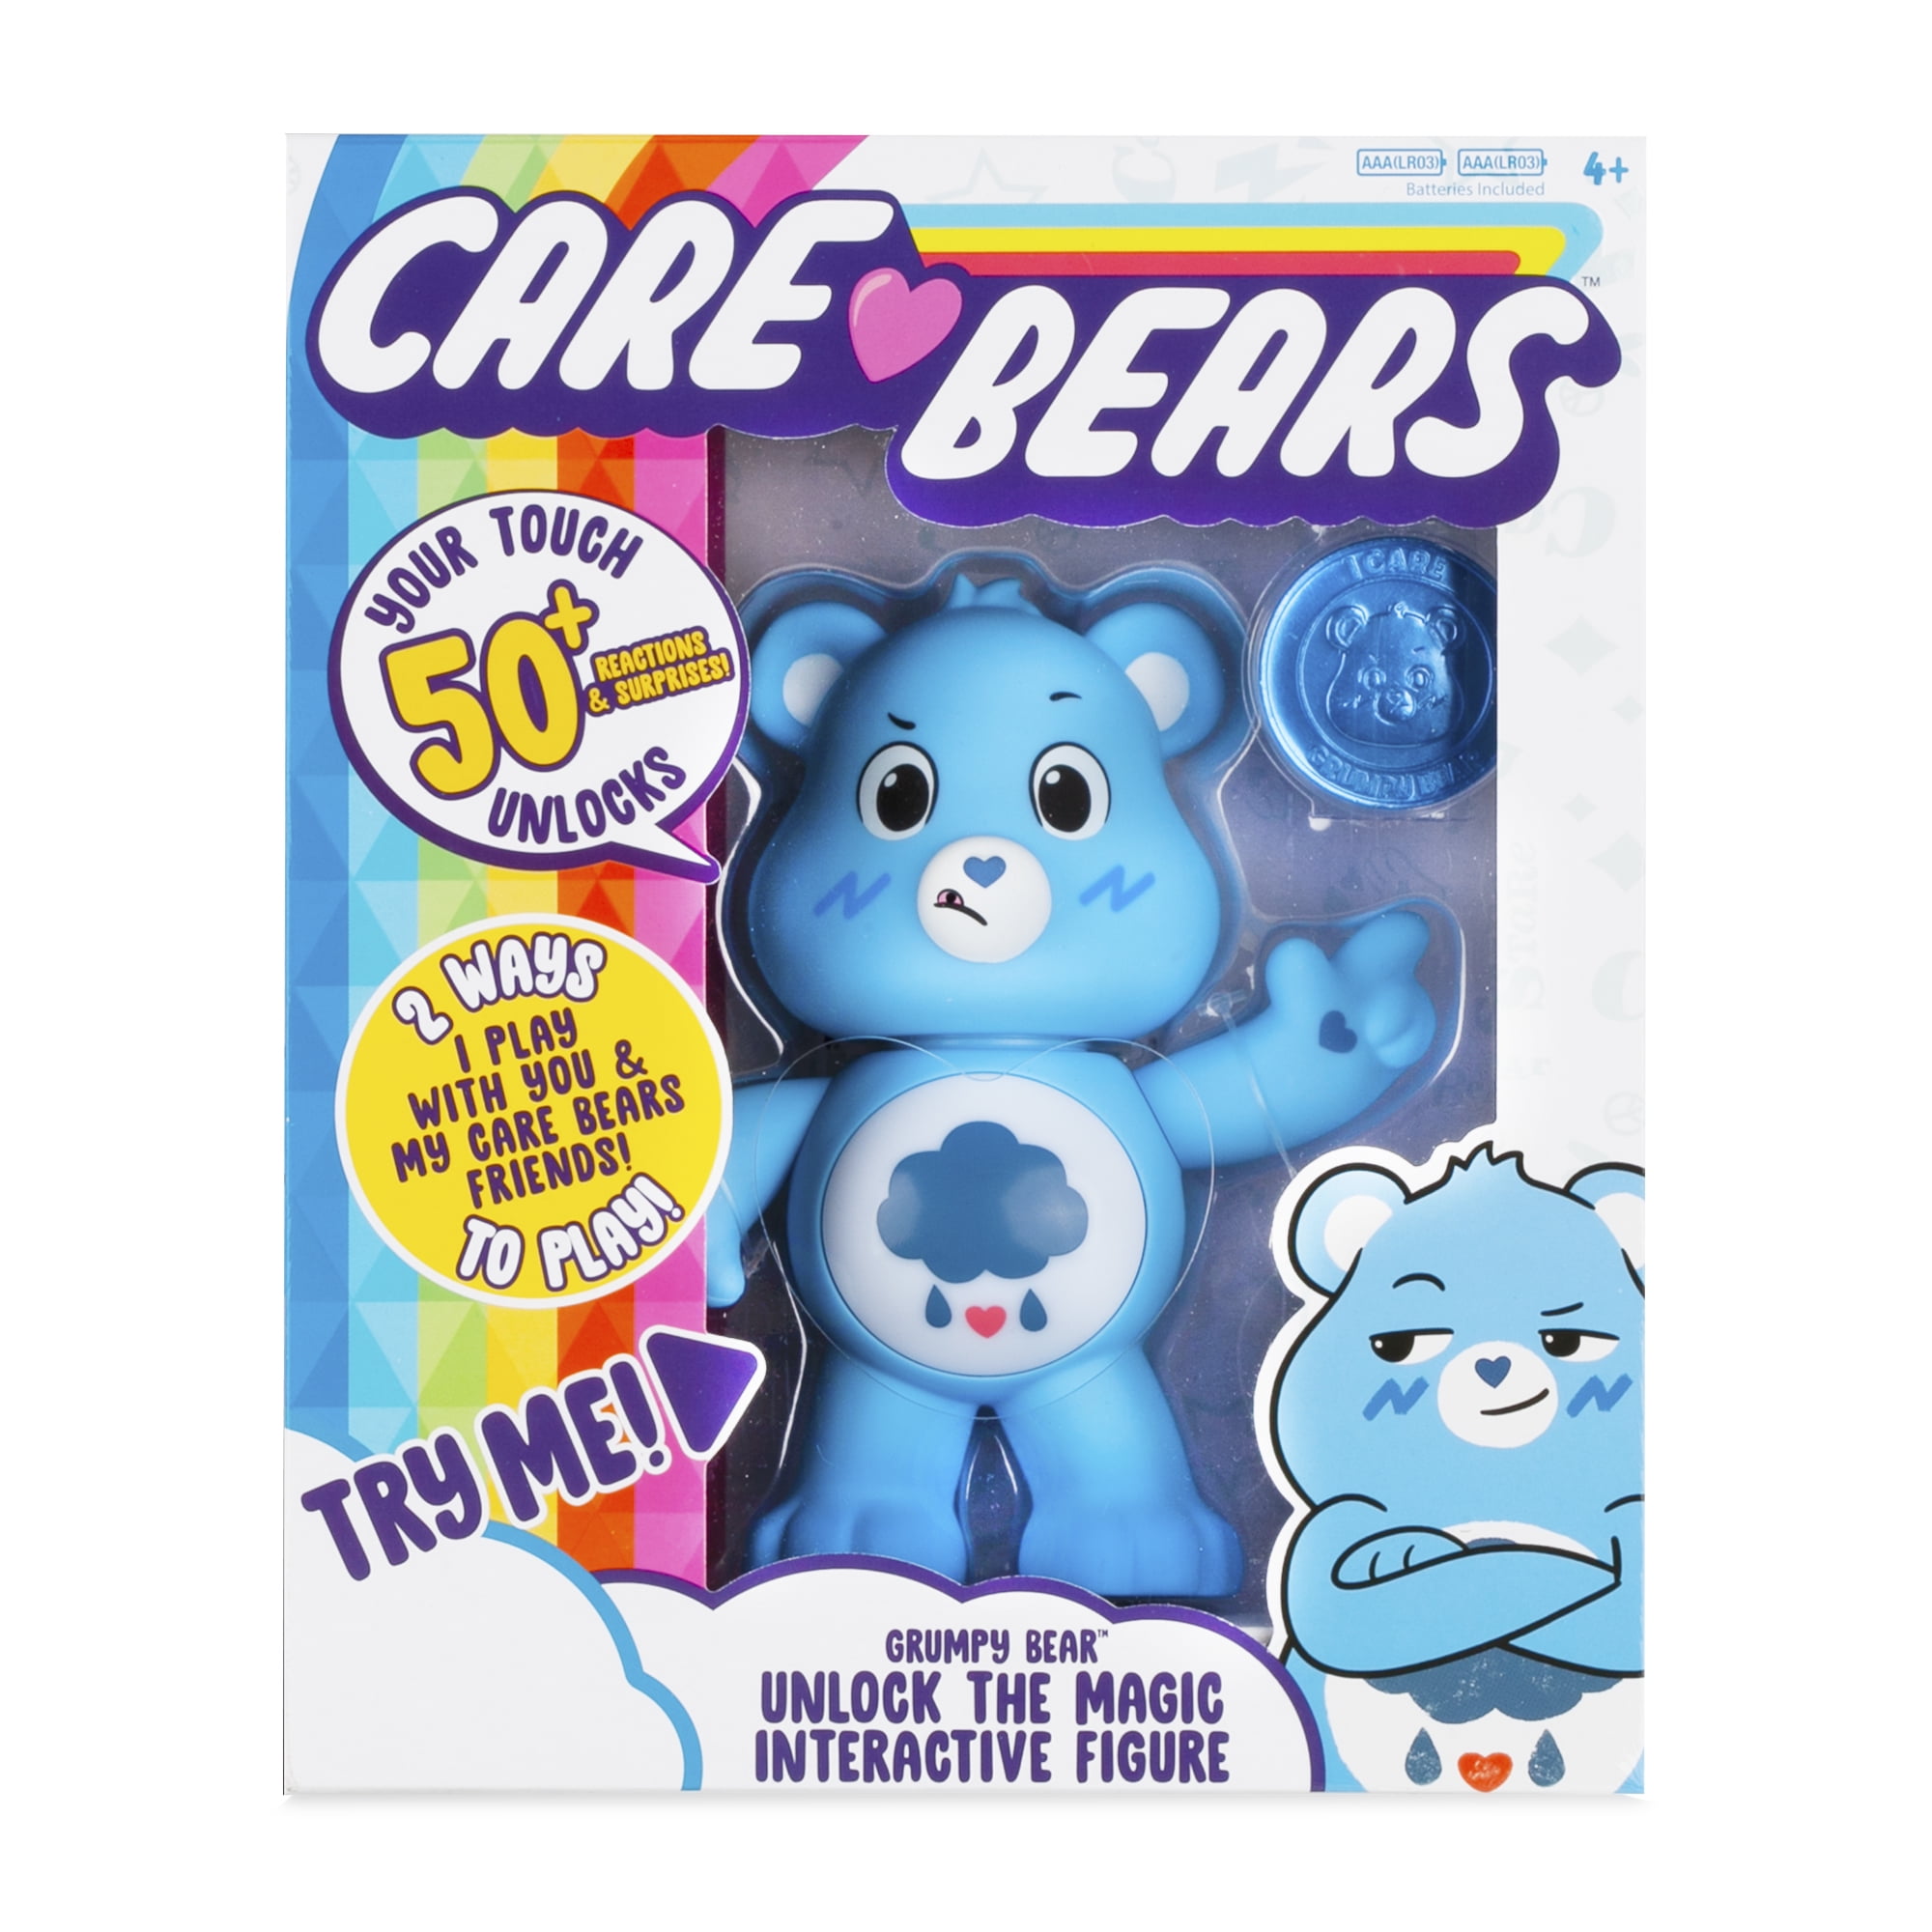 Bear pictures grumpy Care Bears